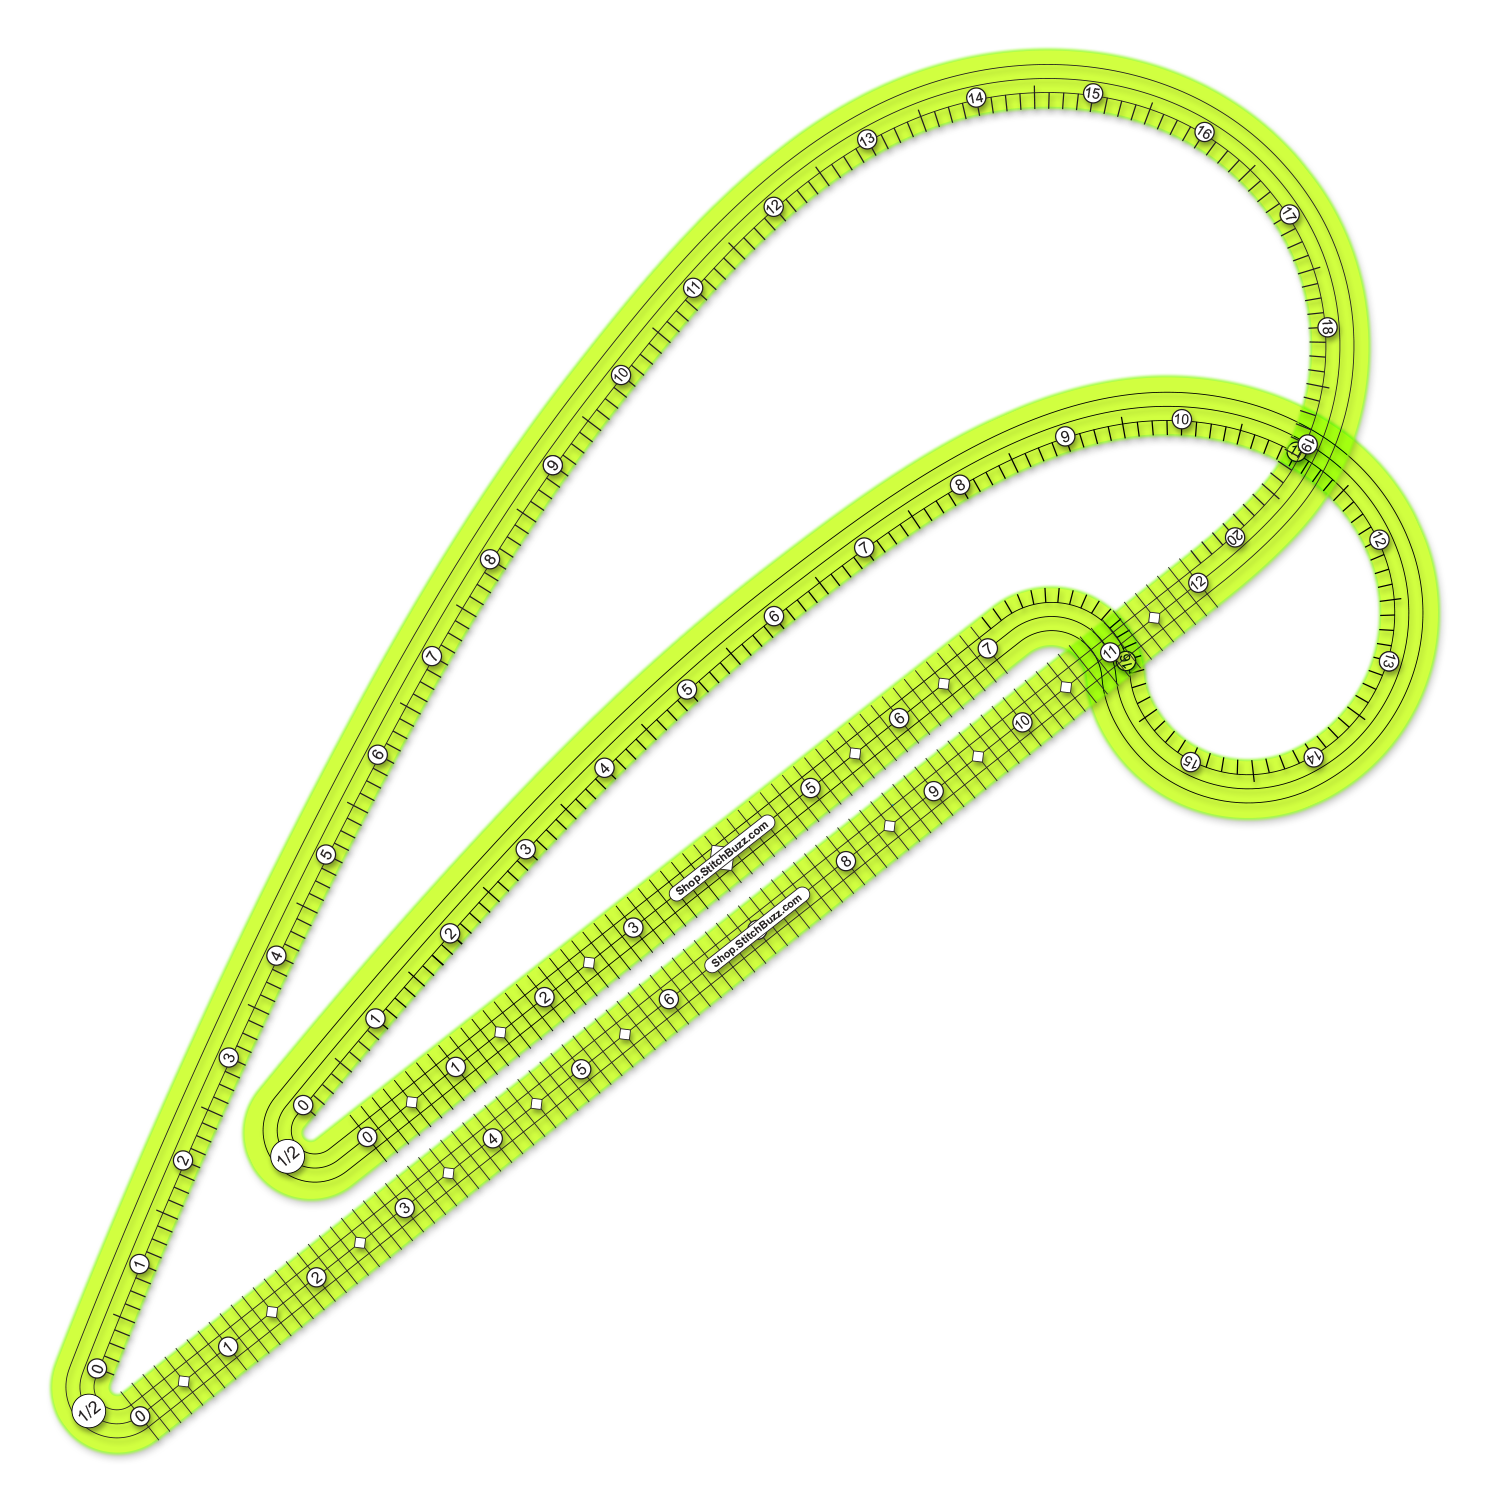 one half inch seam allowance french curve ruler set made from transparent green acrylic